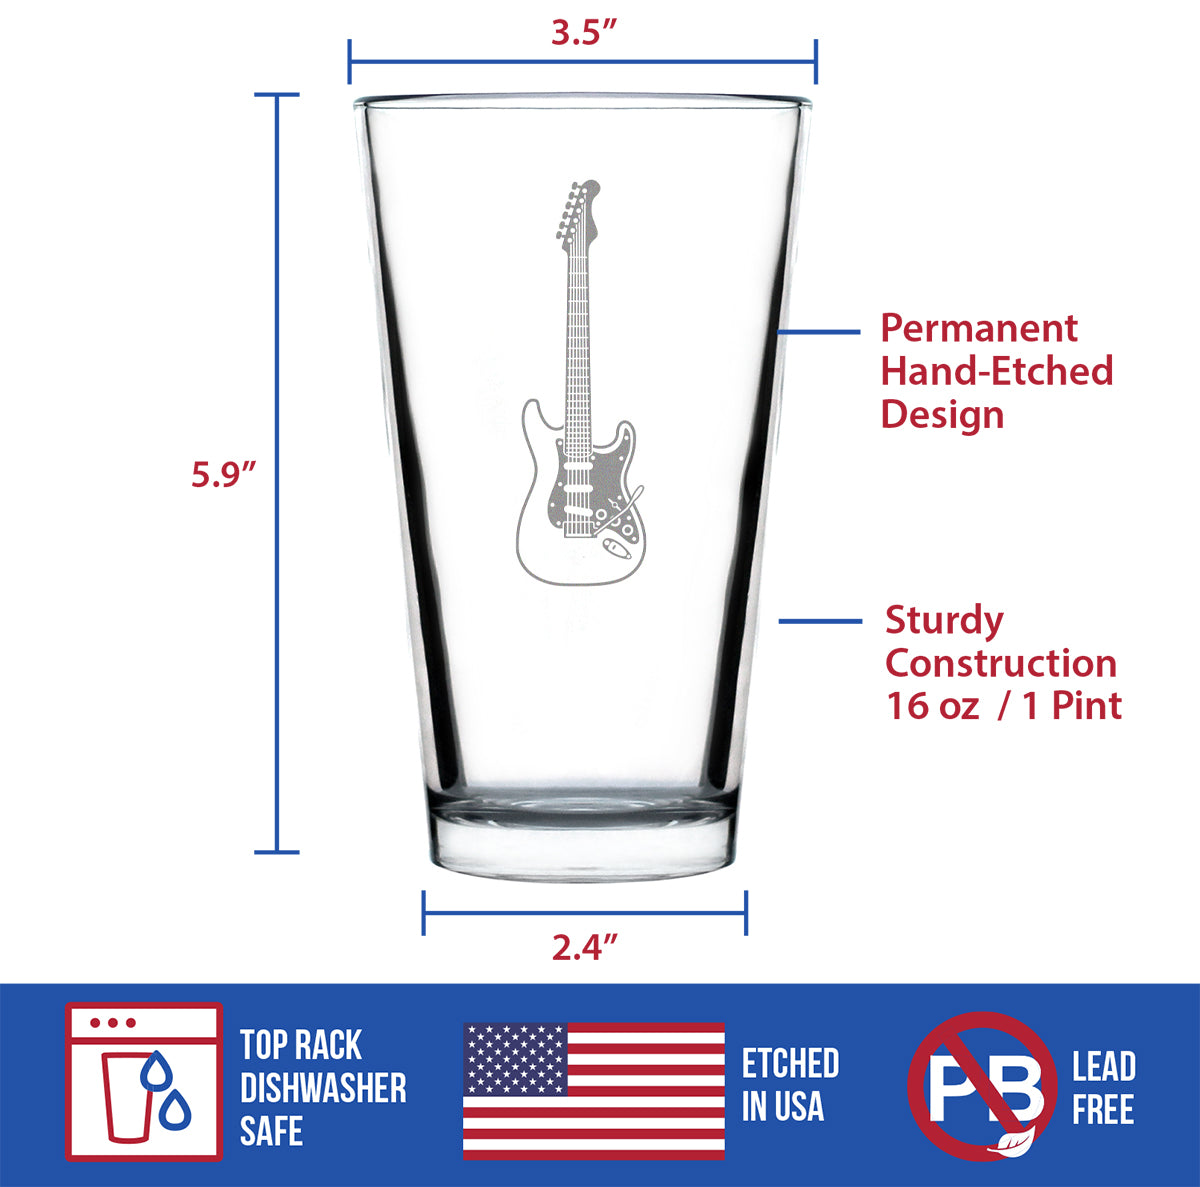 Electric Guitar Pint Glass for Beer - Music Gifts for Guitar Players, Teachers and Musical Accessories for Musicians that Play Guitar - 16 Oz Glasses